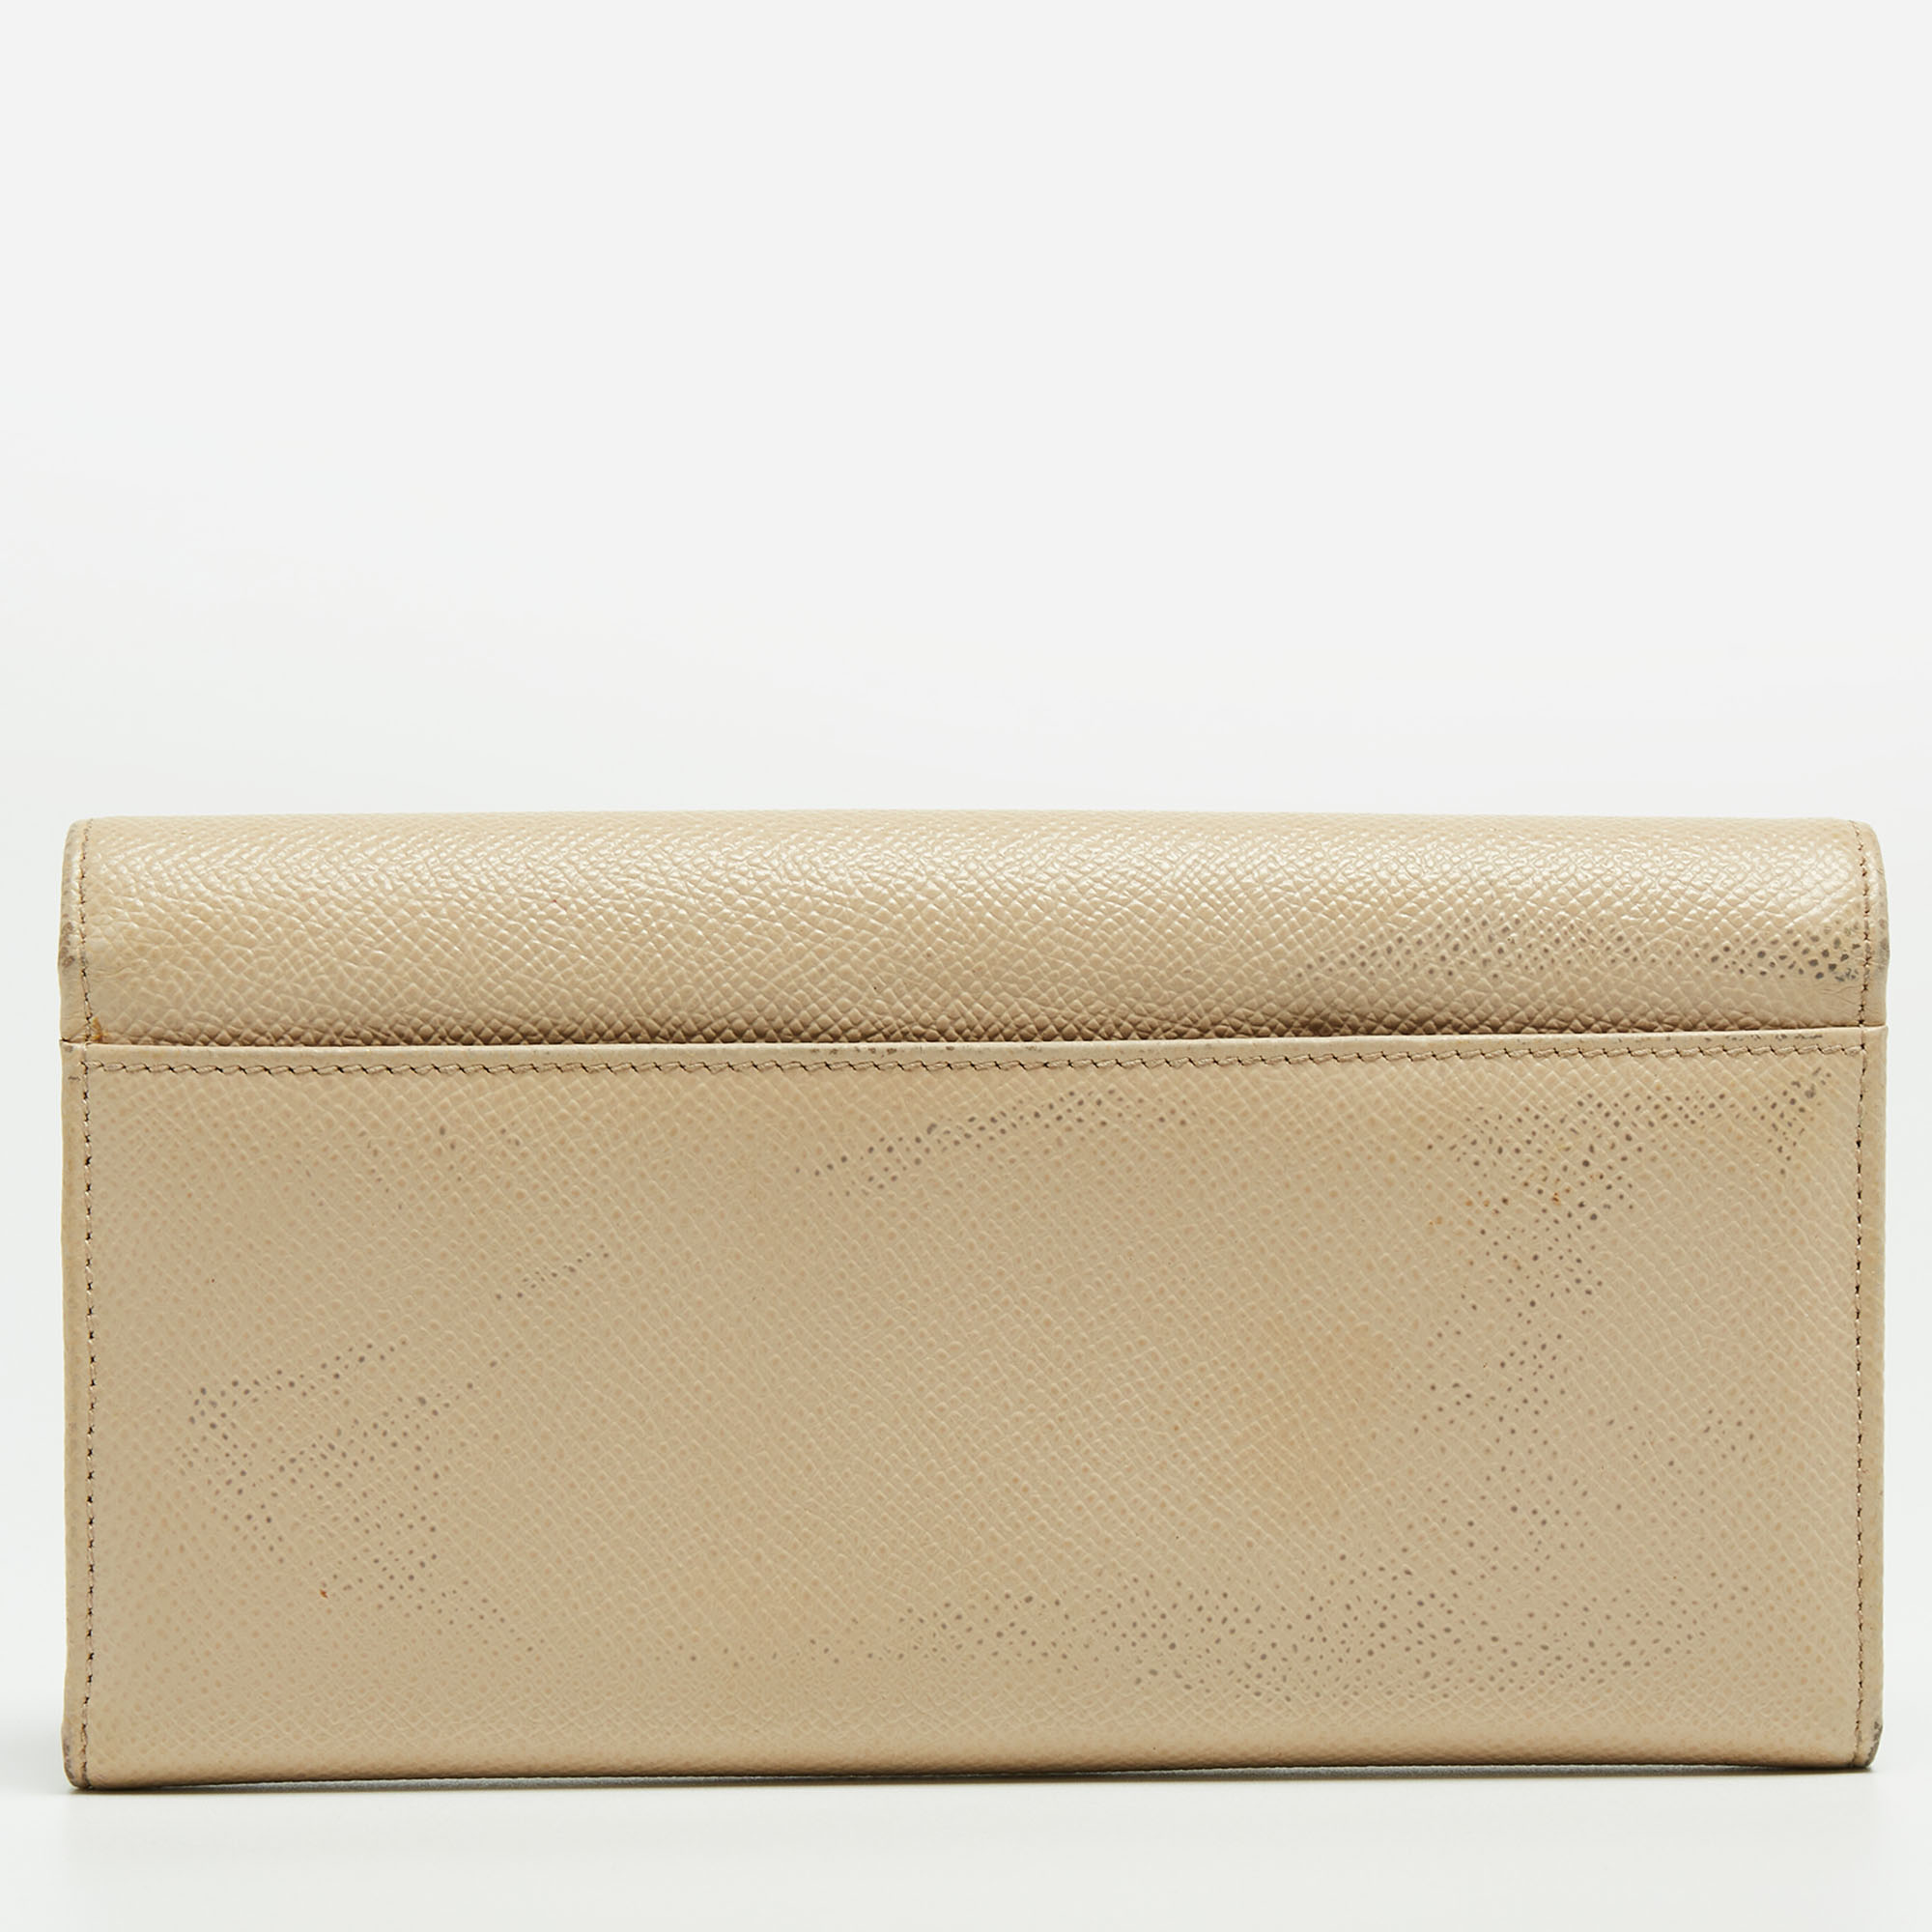 Dolce & Gabbana Beige Leather Dauphine Flap Continental Wallet